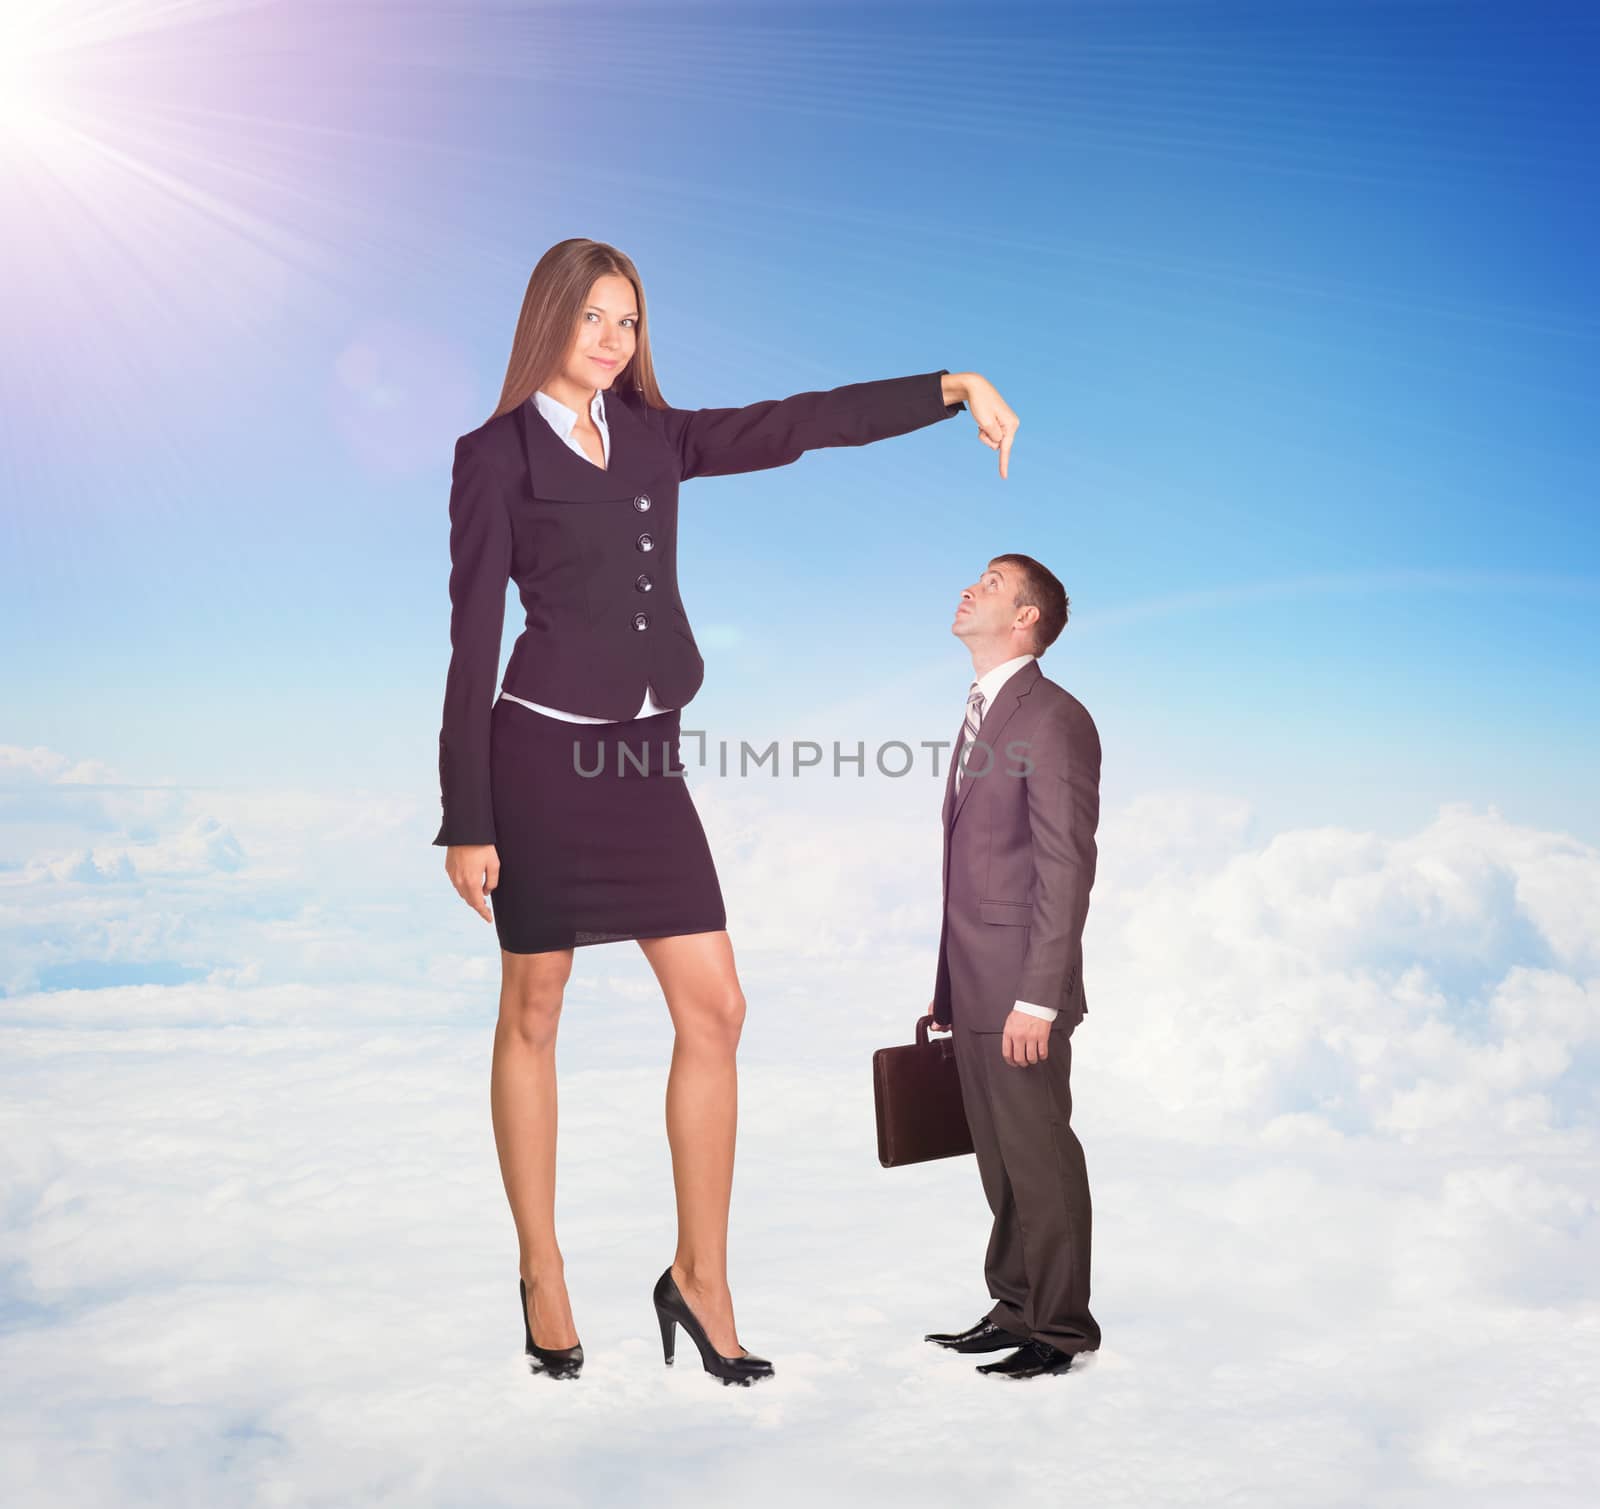 Small businessman looking up at large woman in suit by cherezoff